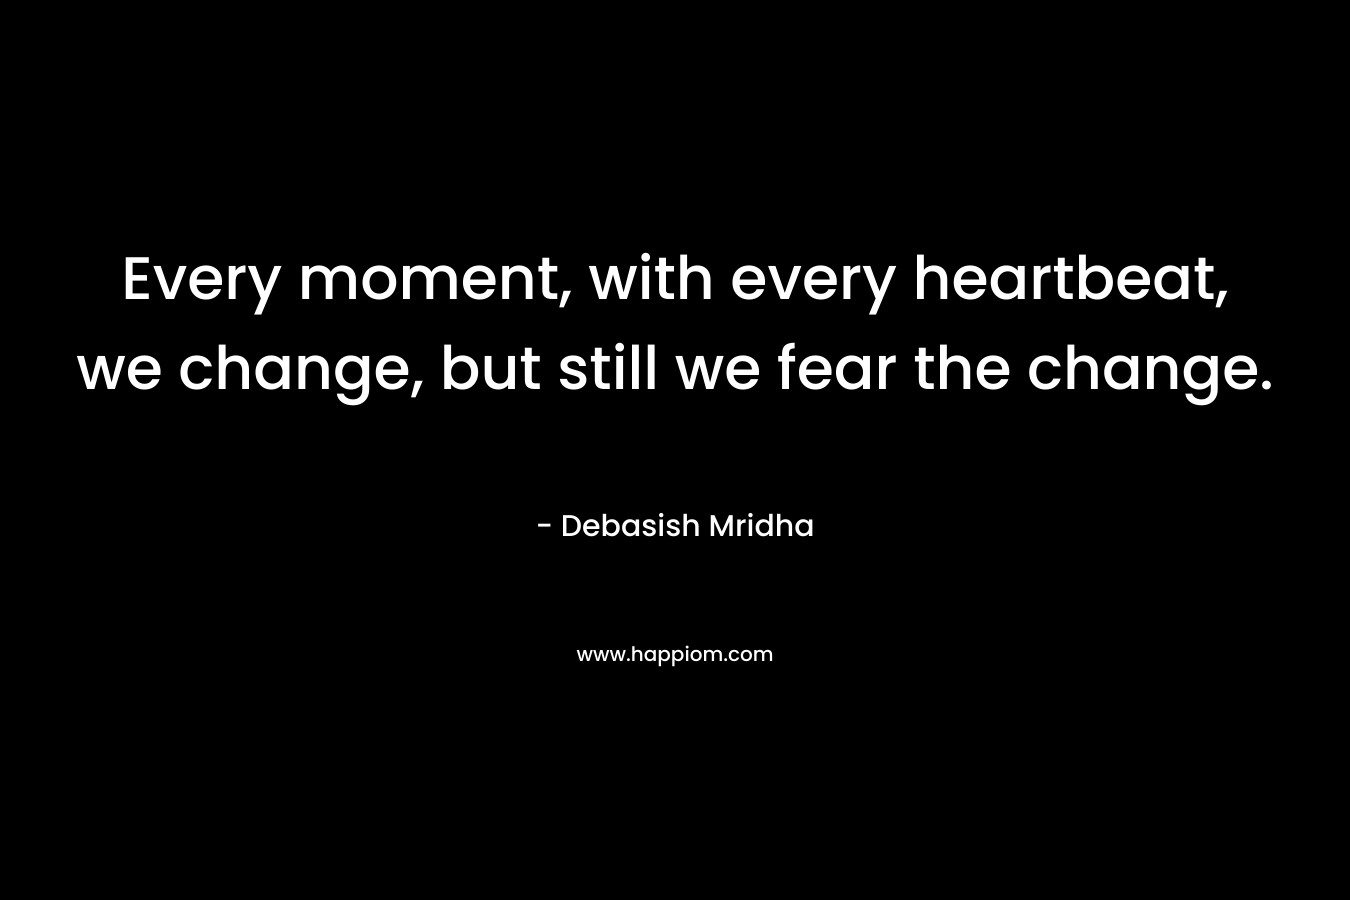 Every moment, with every heartbeat, we change, but still we fear the change.